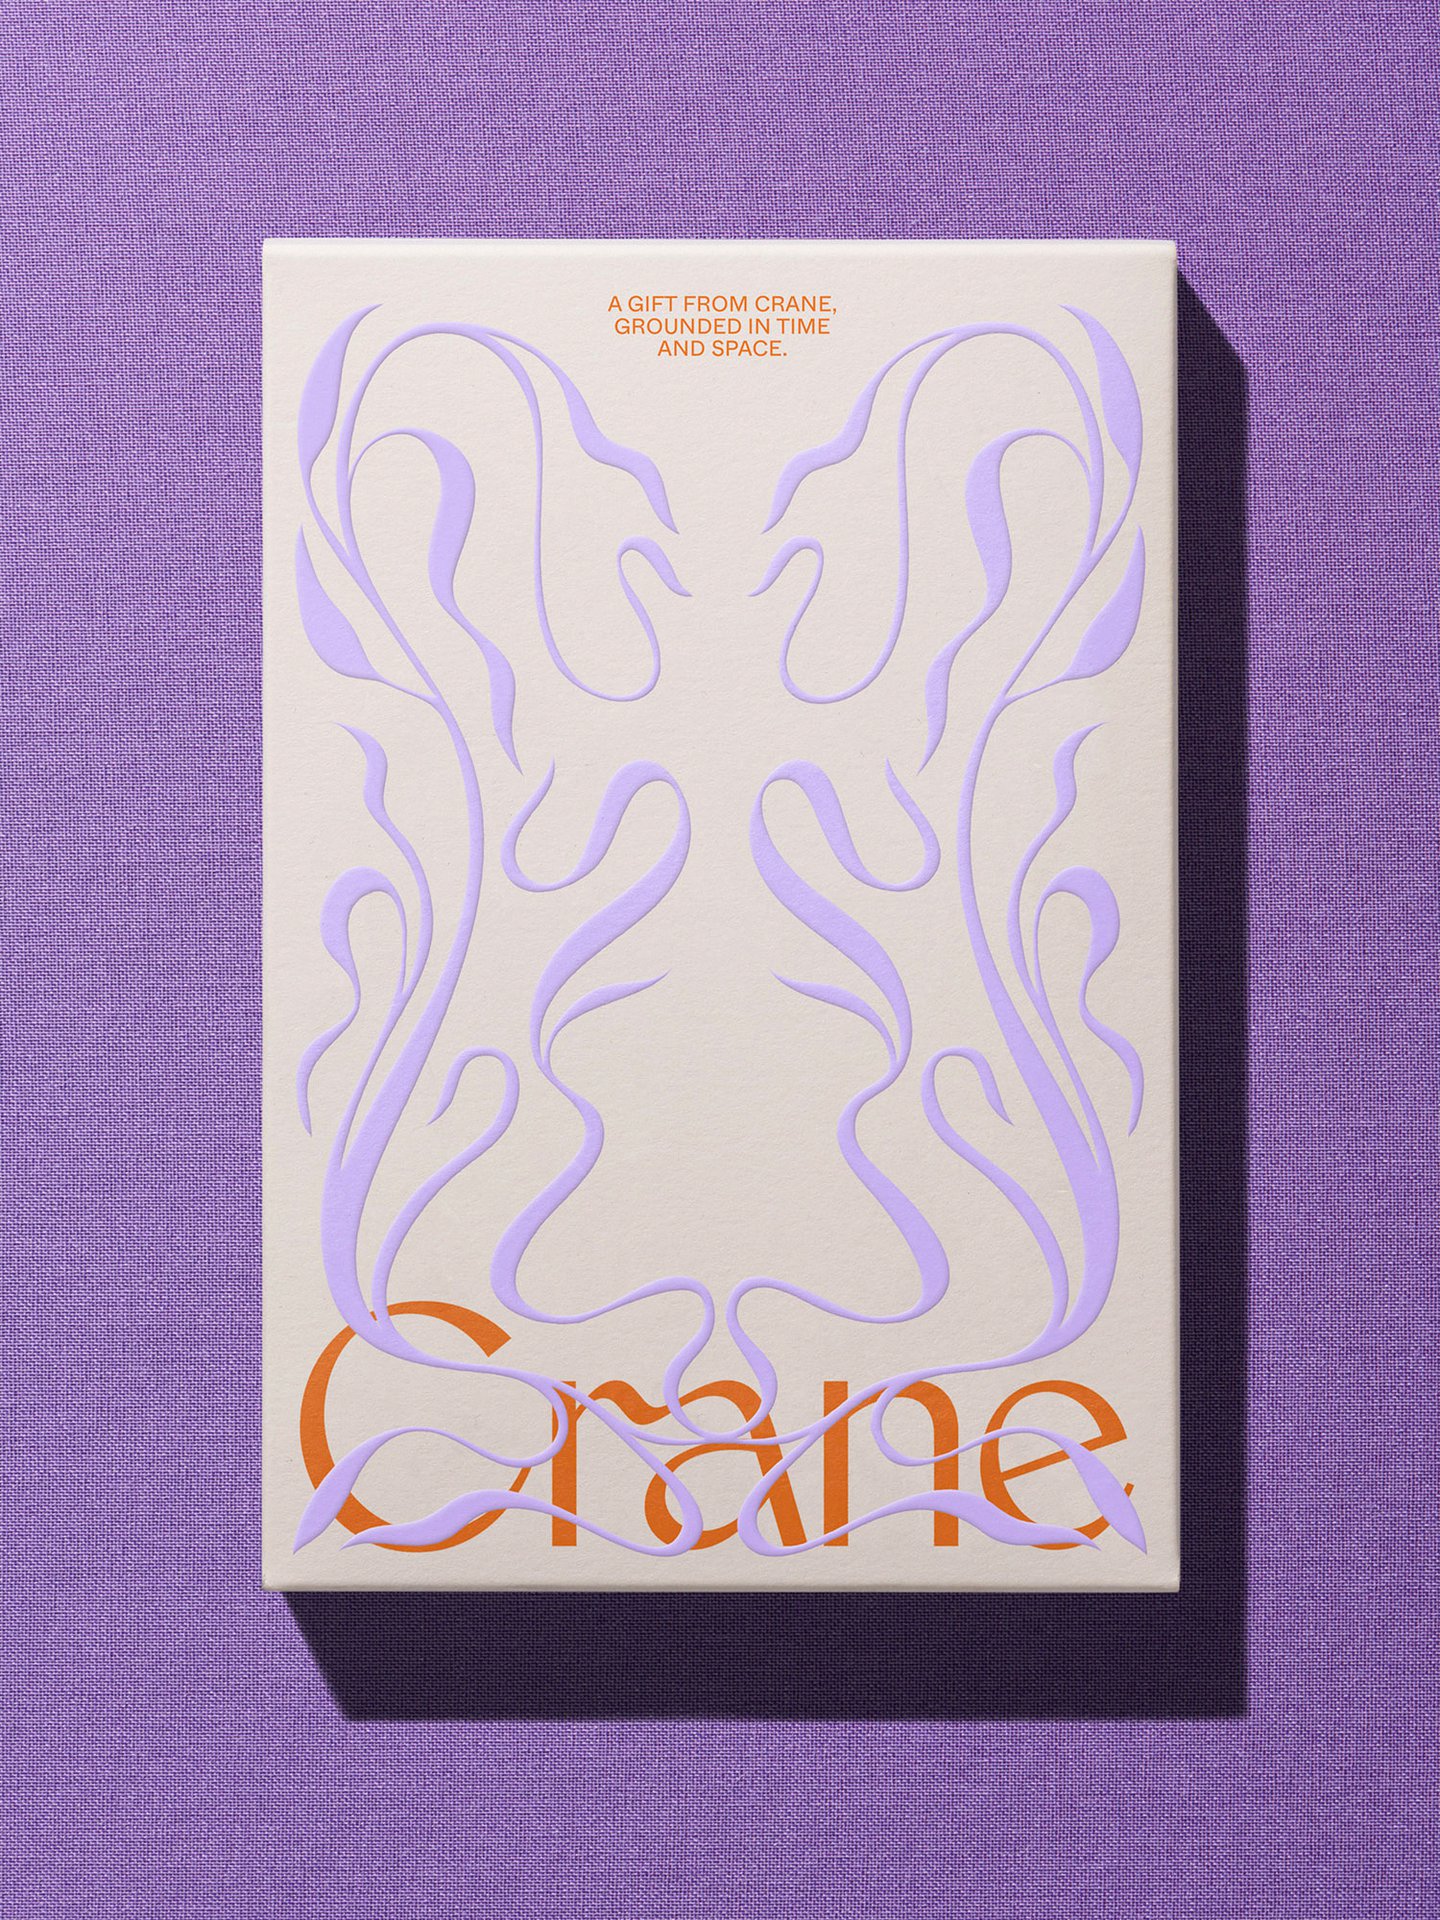 Re-Introducing Crane Cotton Papers — New Colors, New Finish